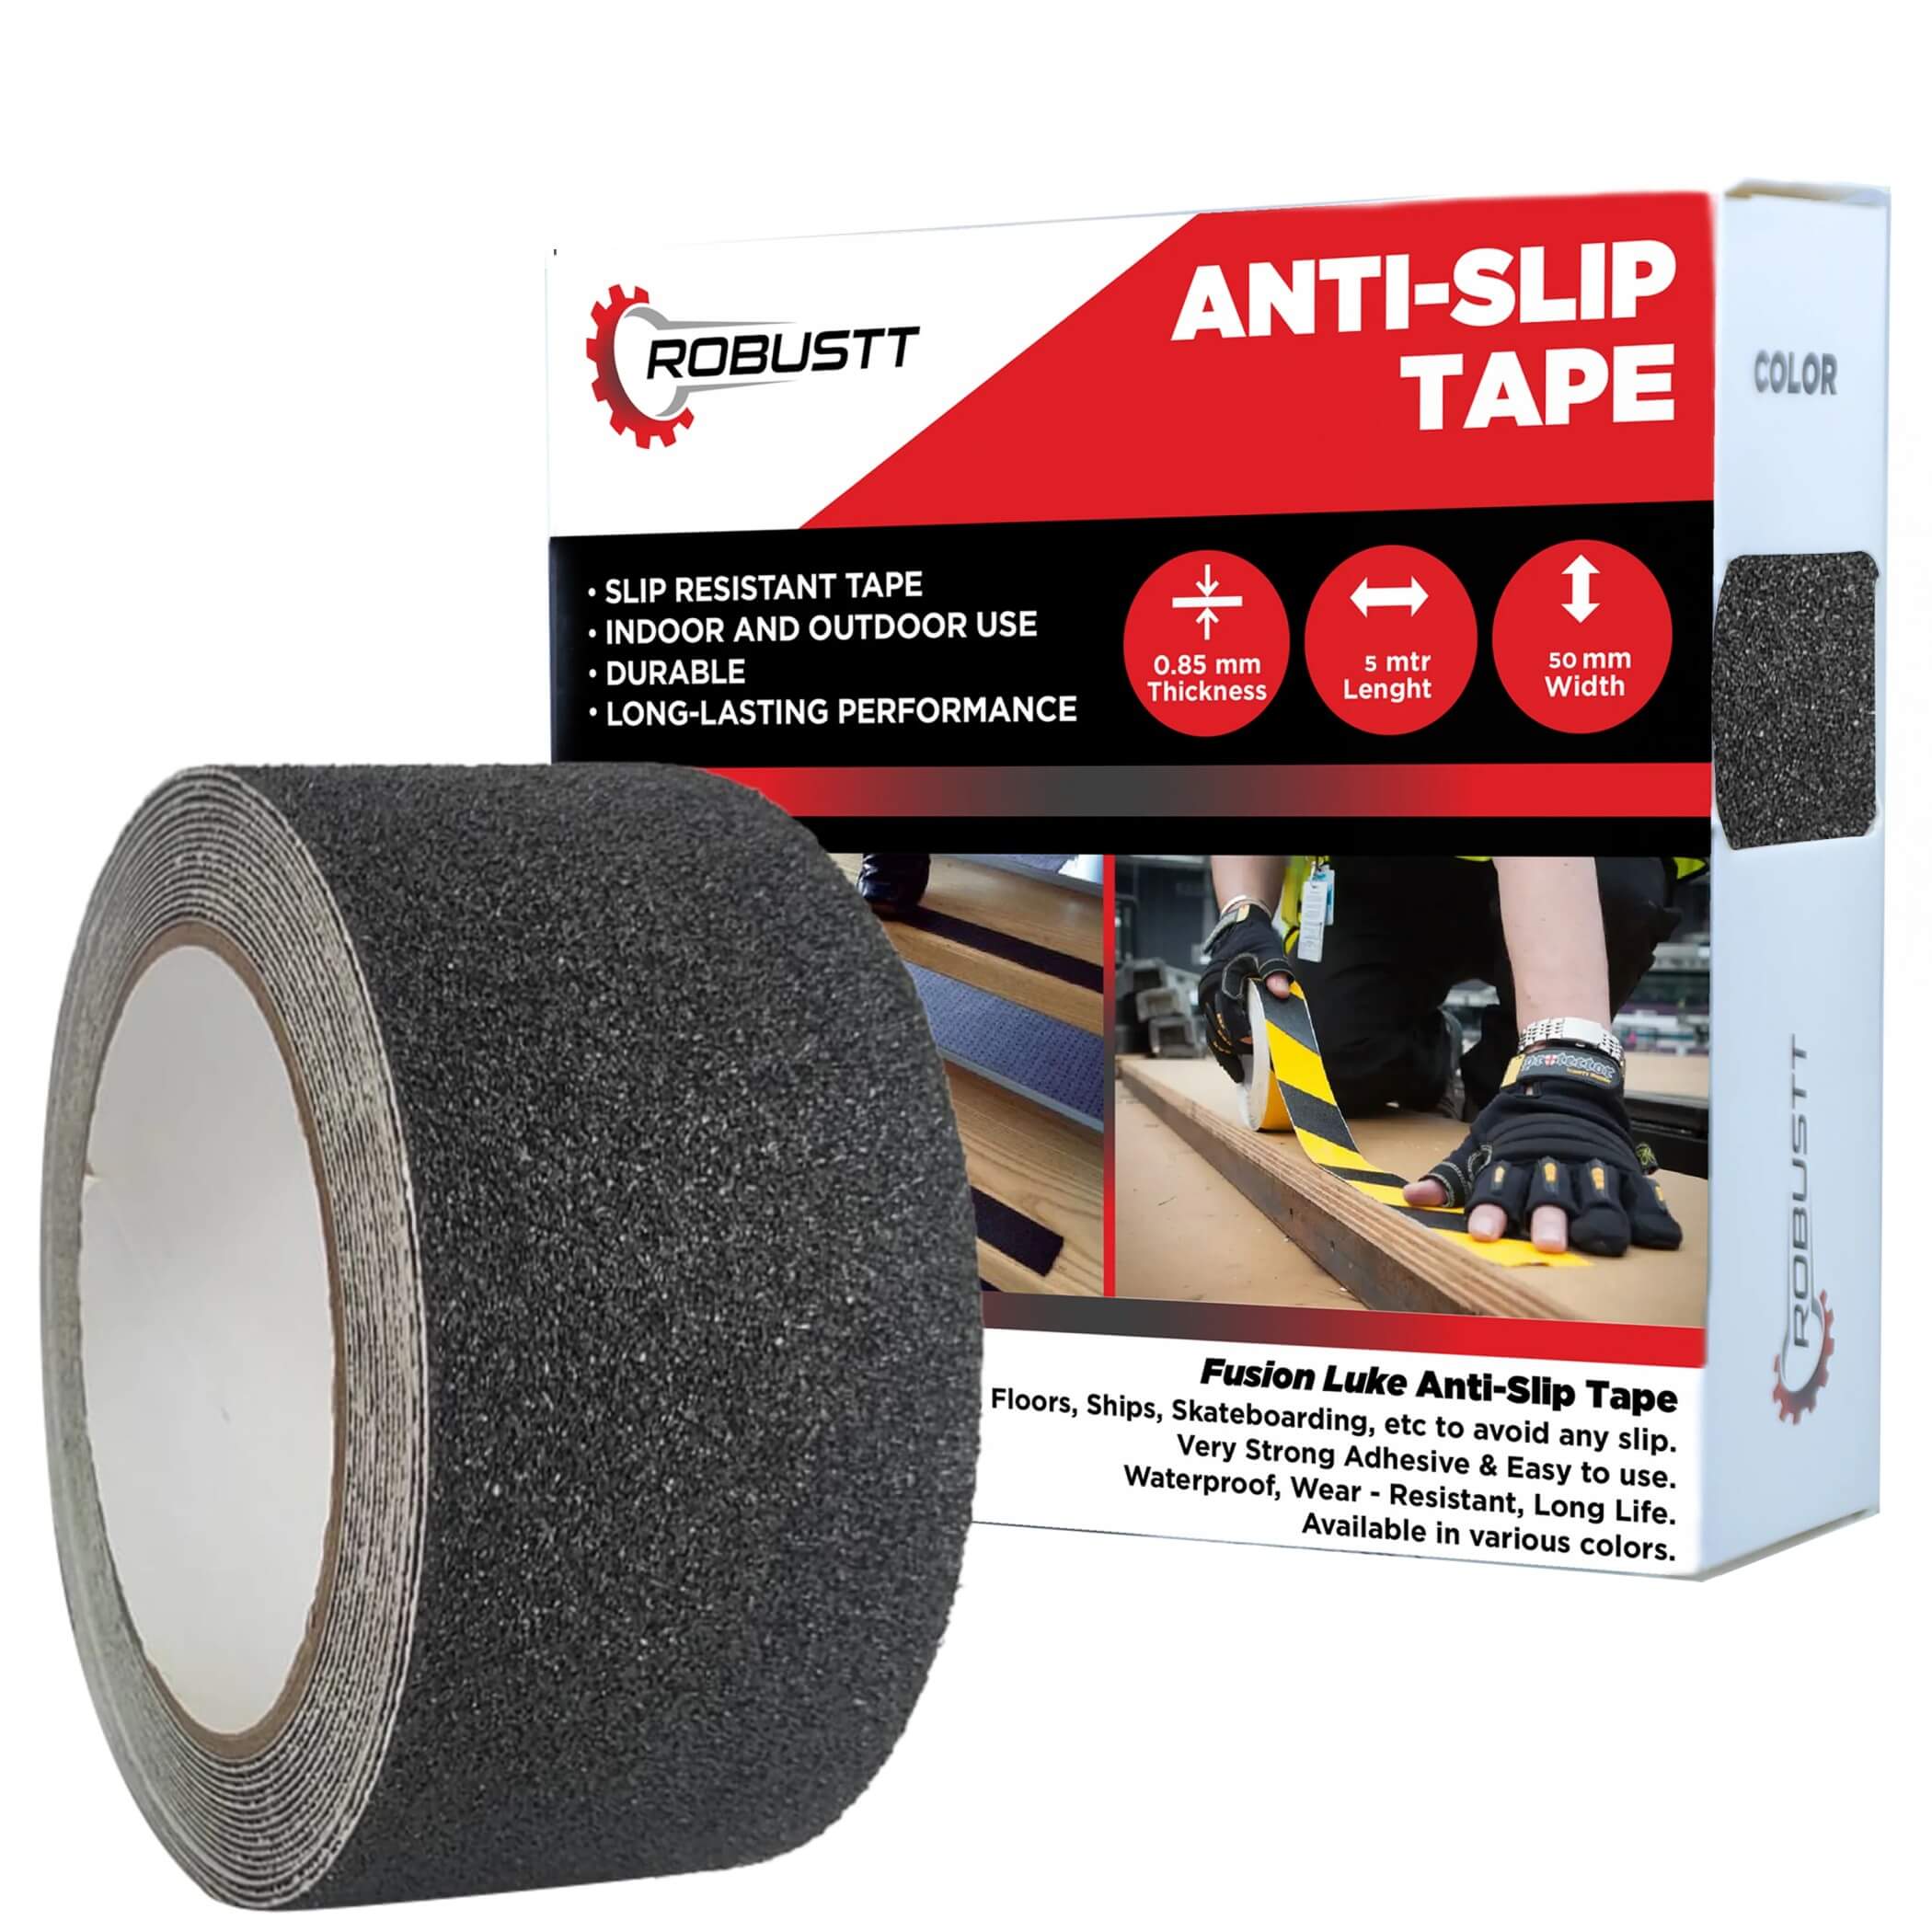 robustt-anti-skid-antislip-10mtr-guaranteed-x50mm-black-fall-resistant-with-pet-material-and-solvent-acrylic-adhesive-tape-pack-of-1